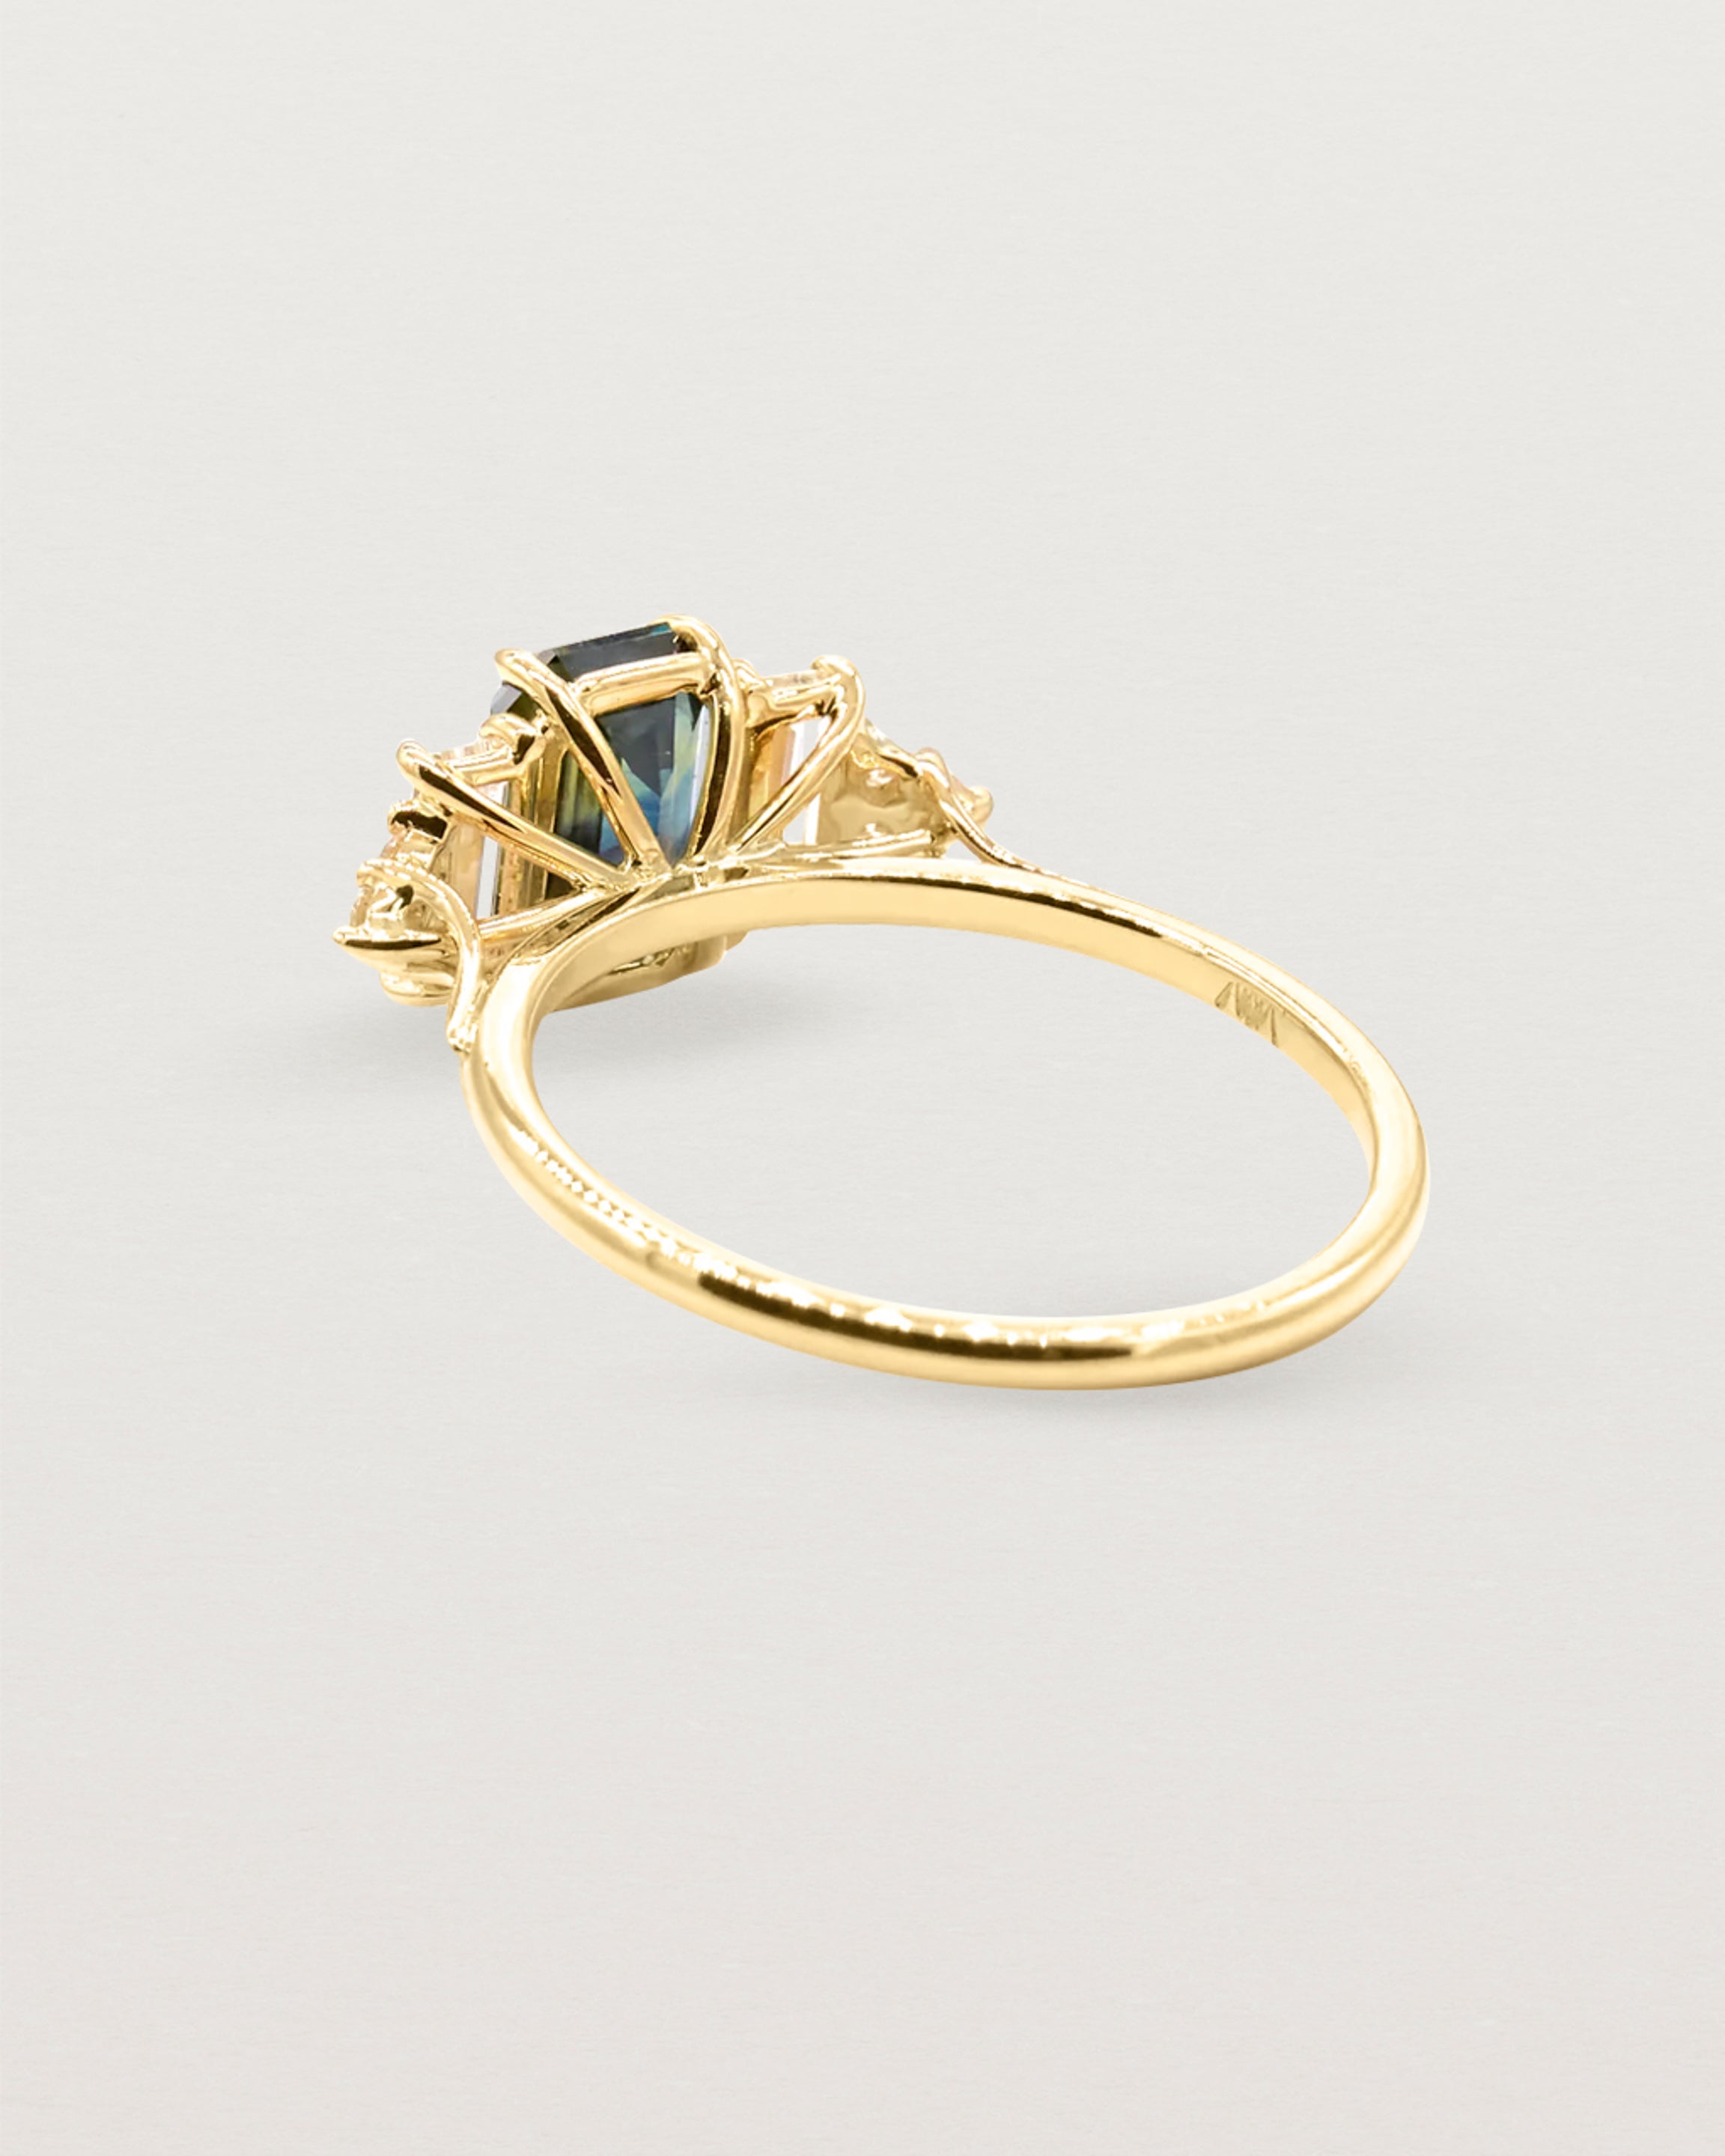 Back view of a cluster ring set in yellow gold